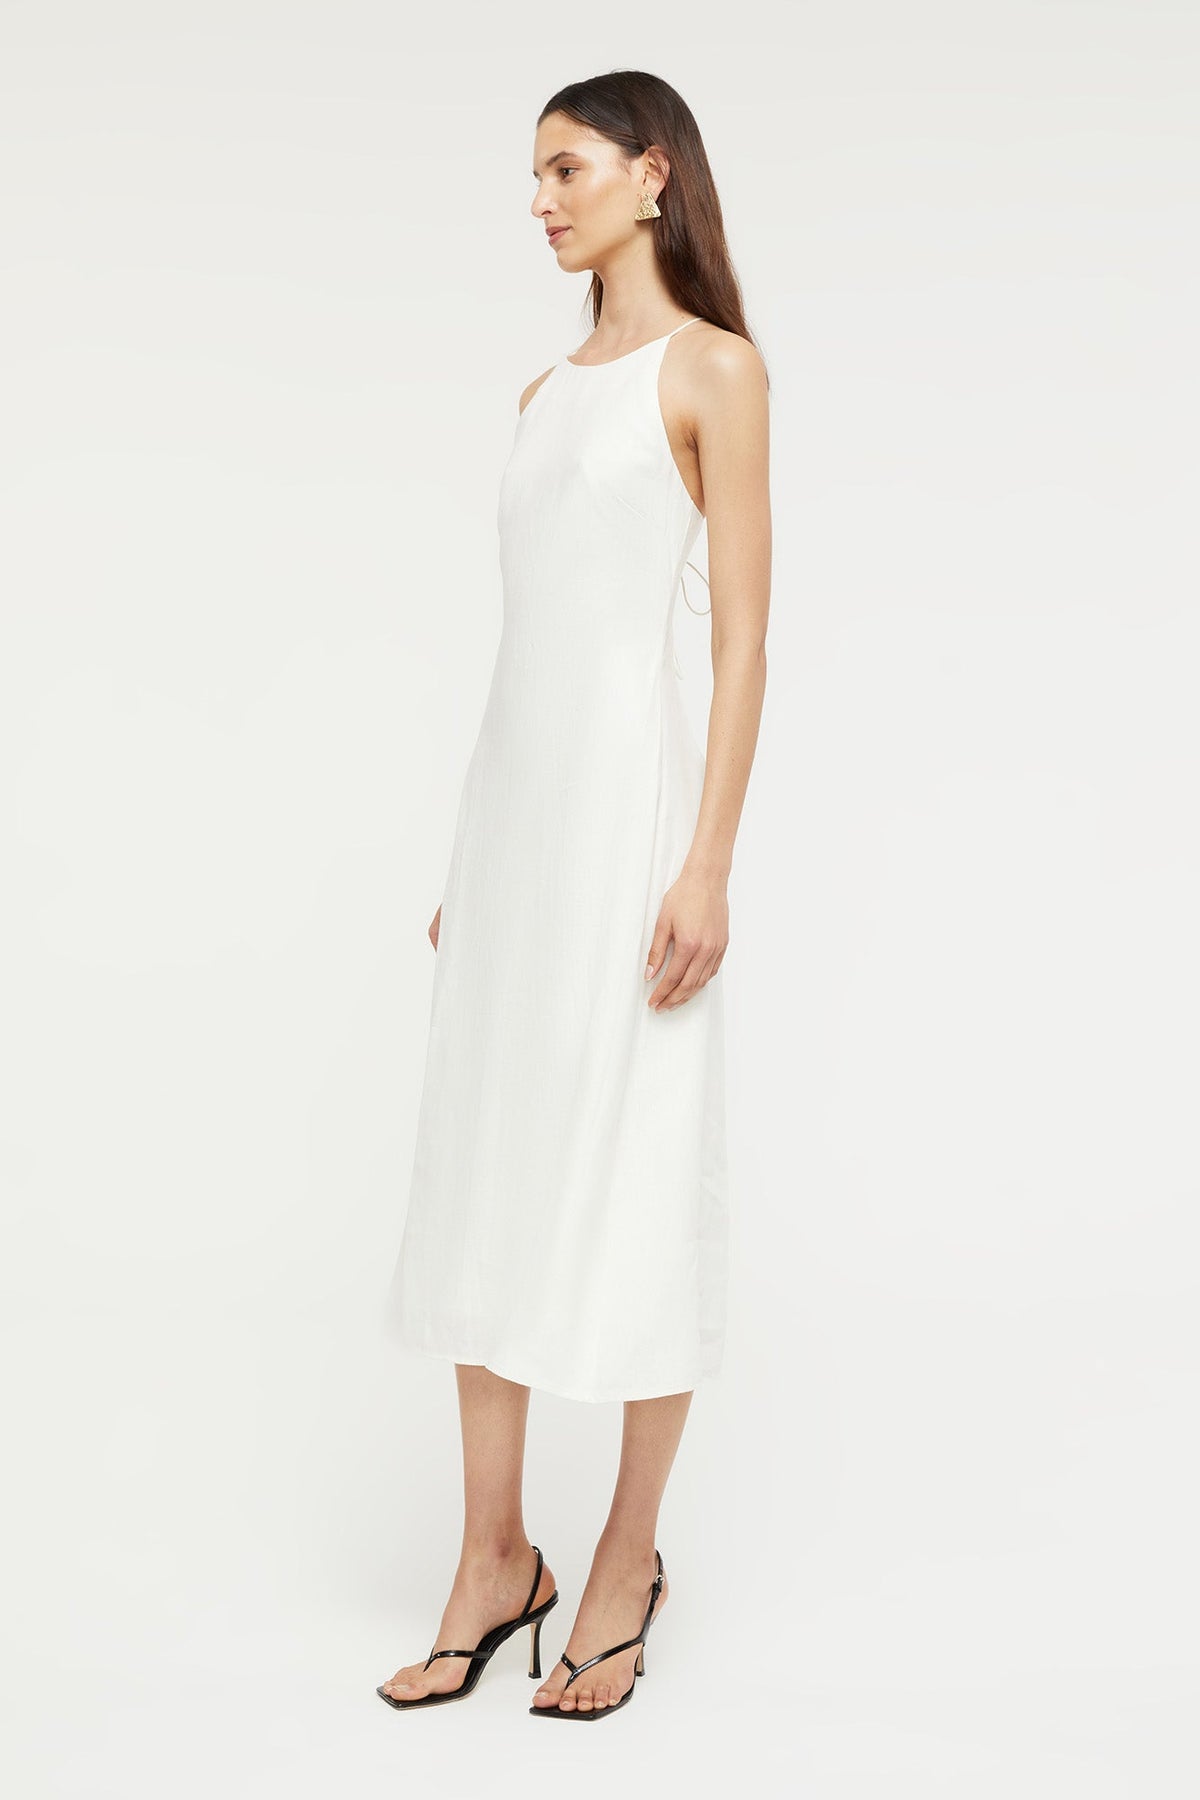 GINIA Frankie Flare Dress in Creme 100% Linen